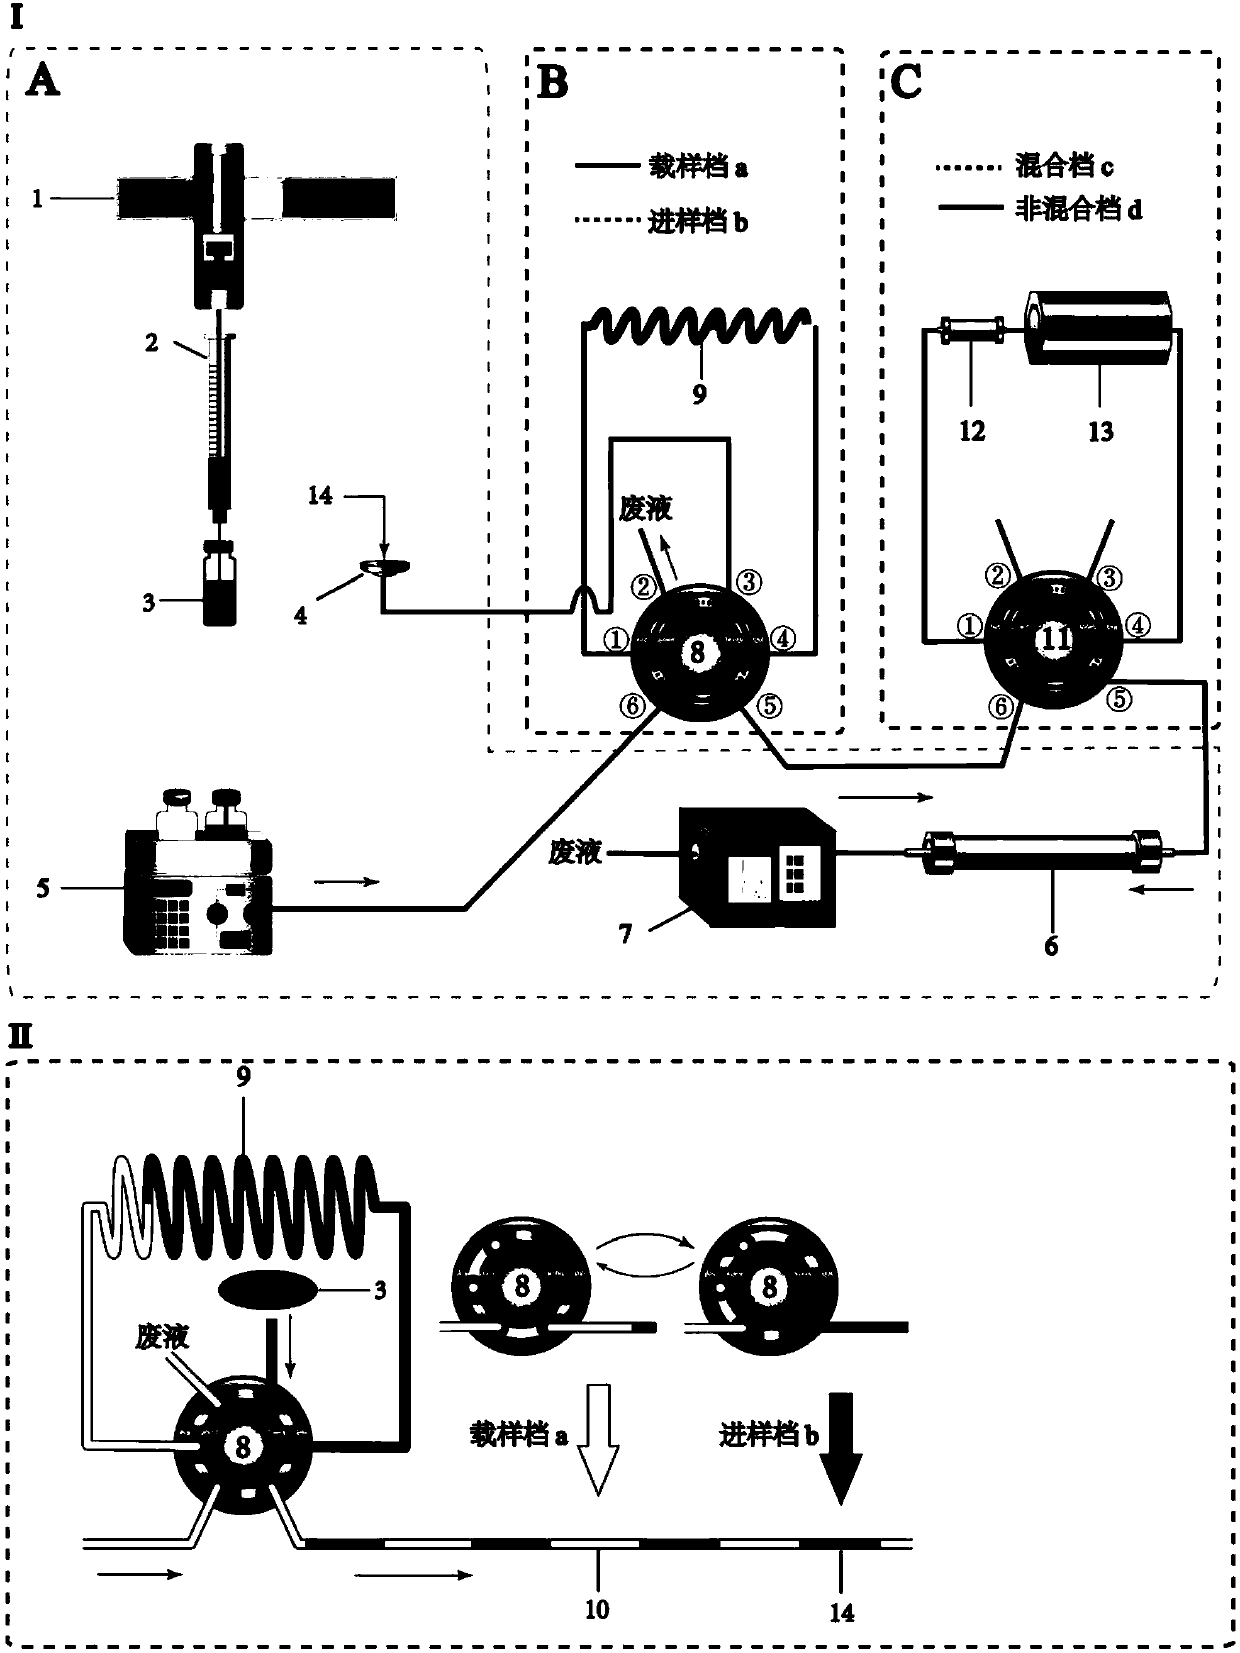 A combined method of step-by-step focusing-axial mixing-high performance liquid chromatography separation system